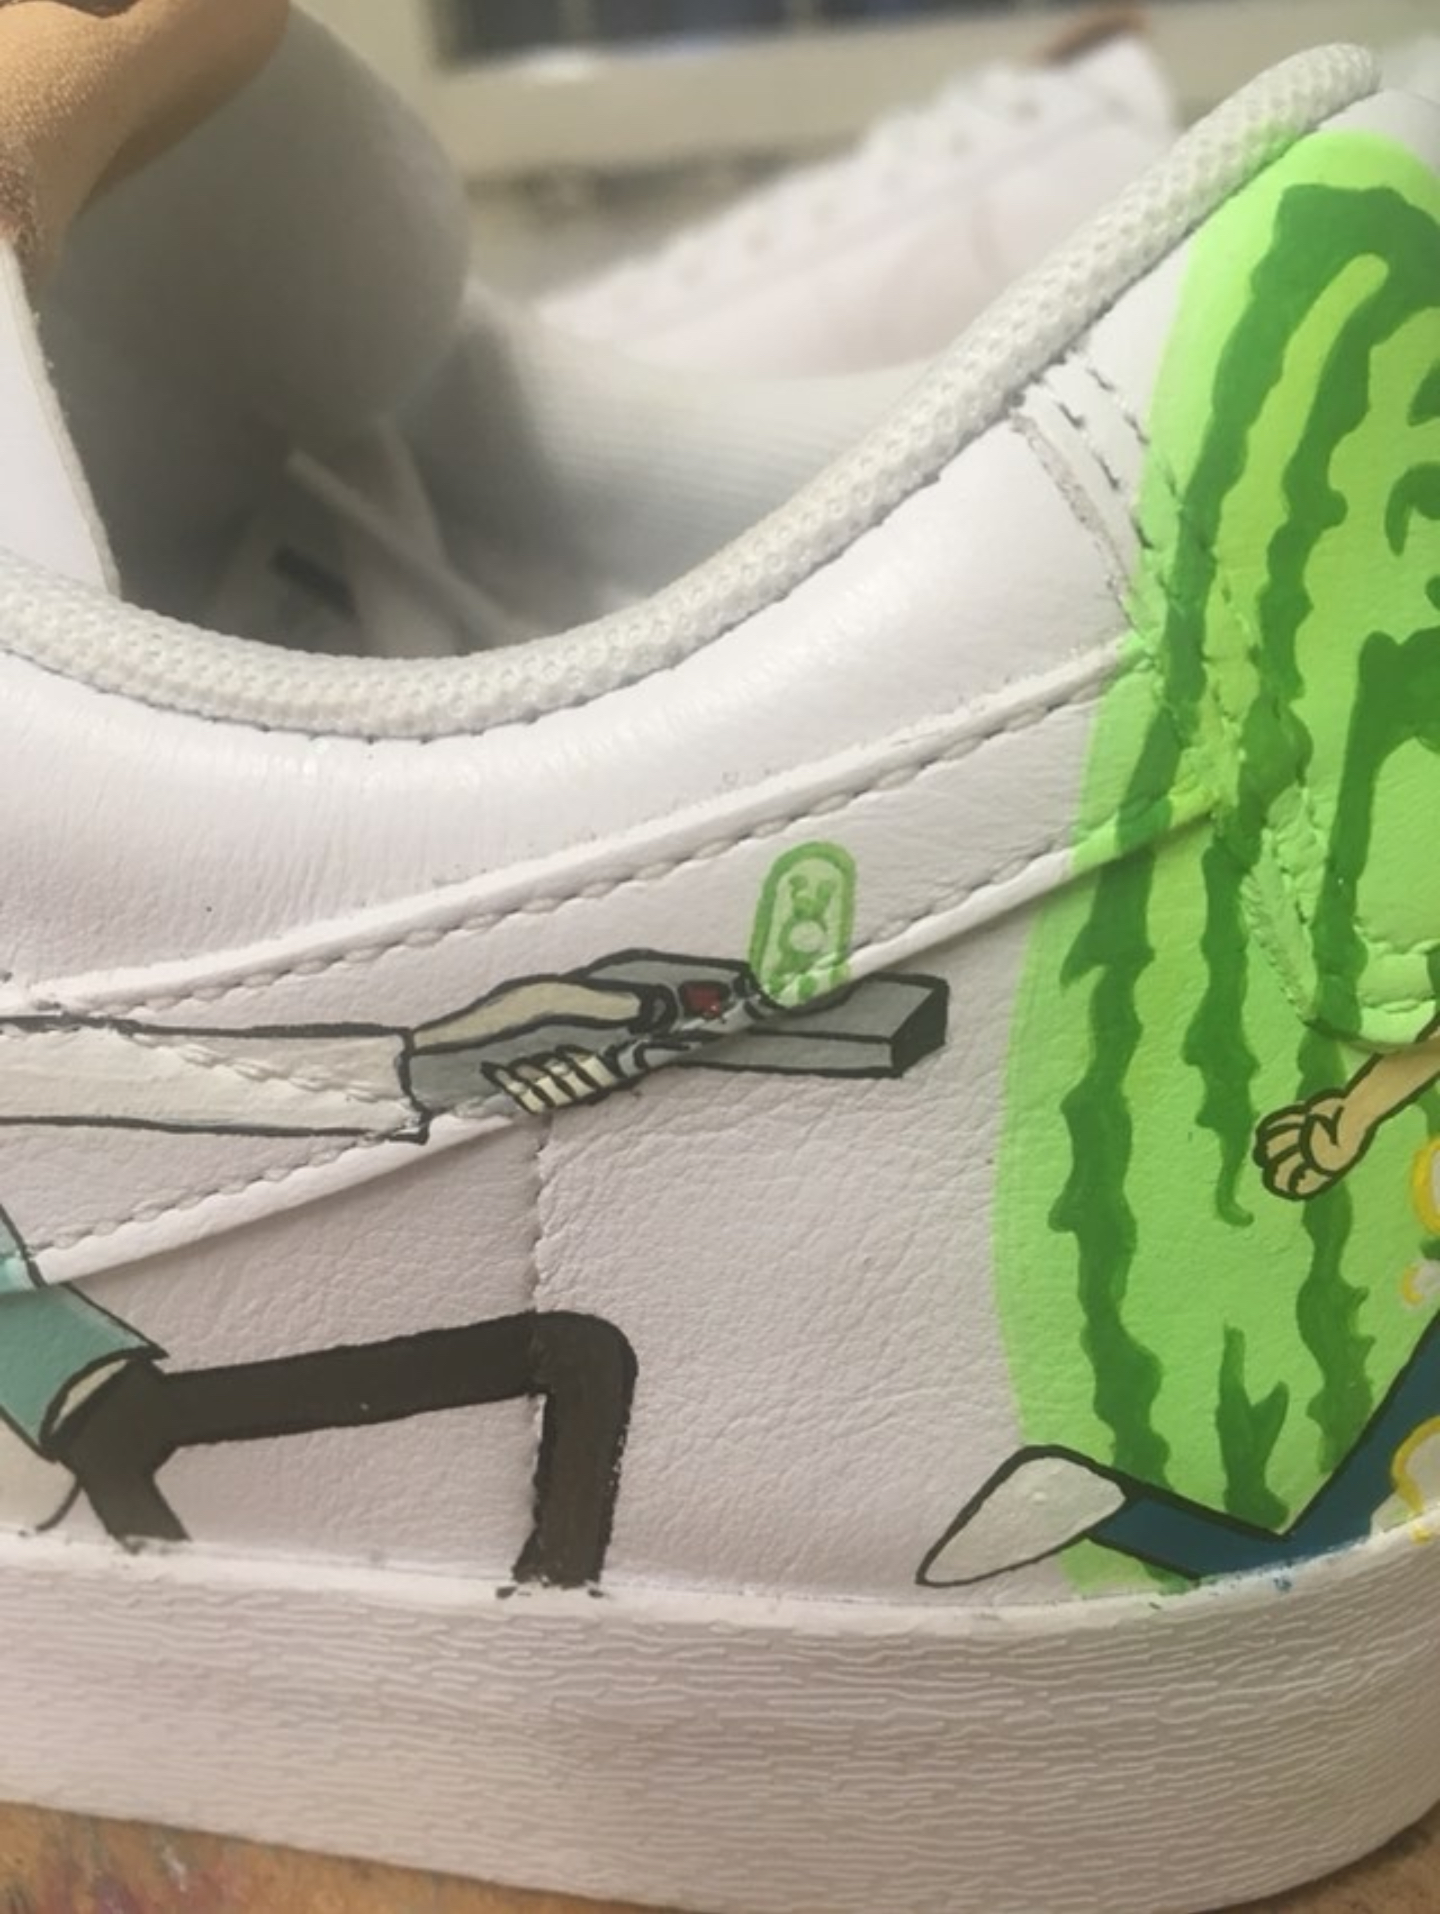 Check Out These Rick and Morty Customs by Tornschuhjette - WearTesters